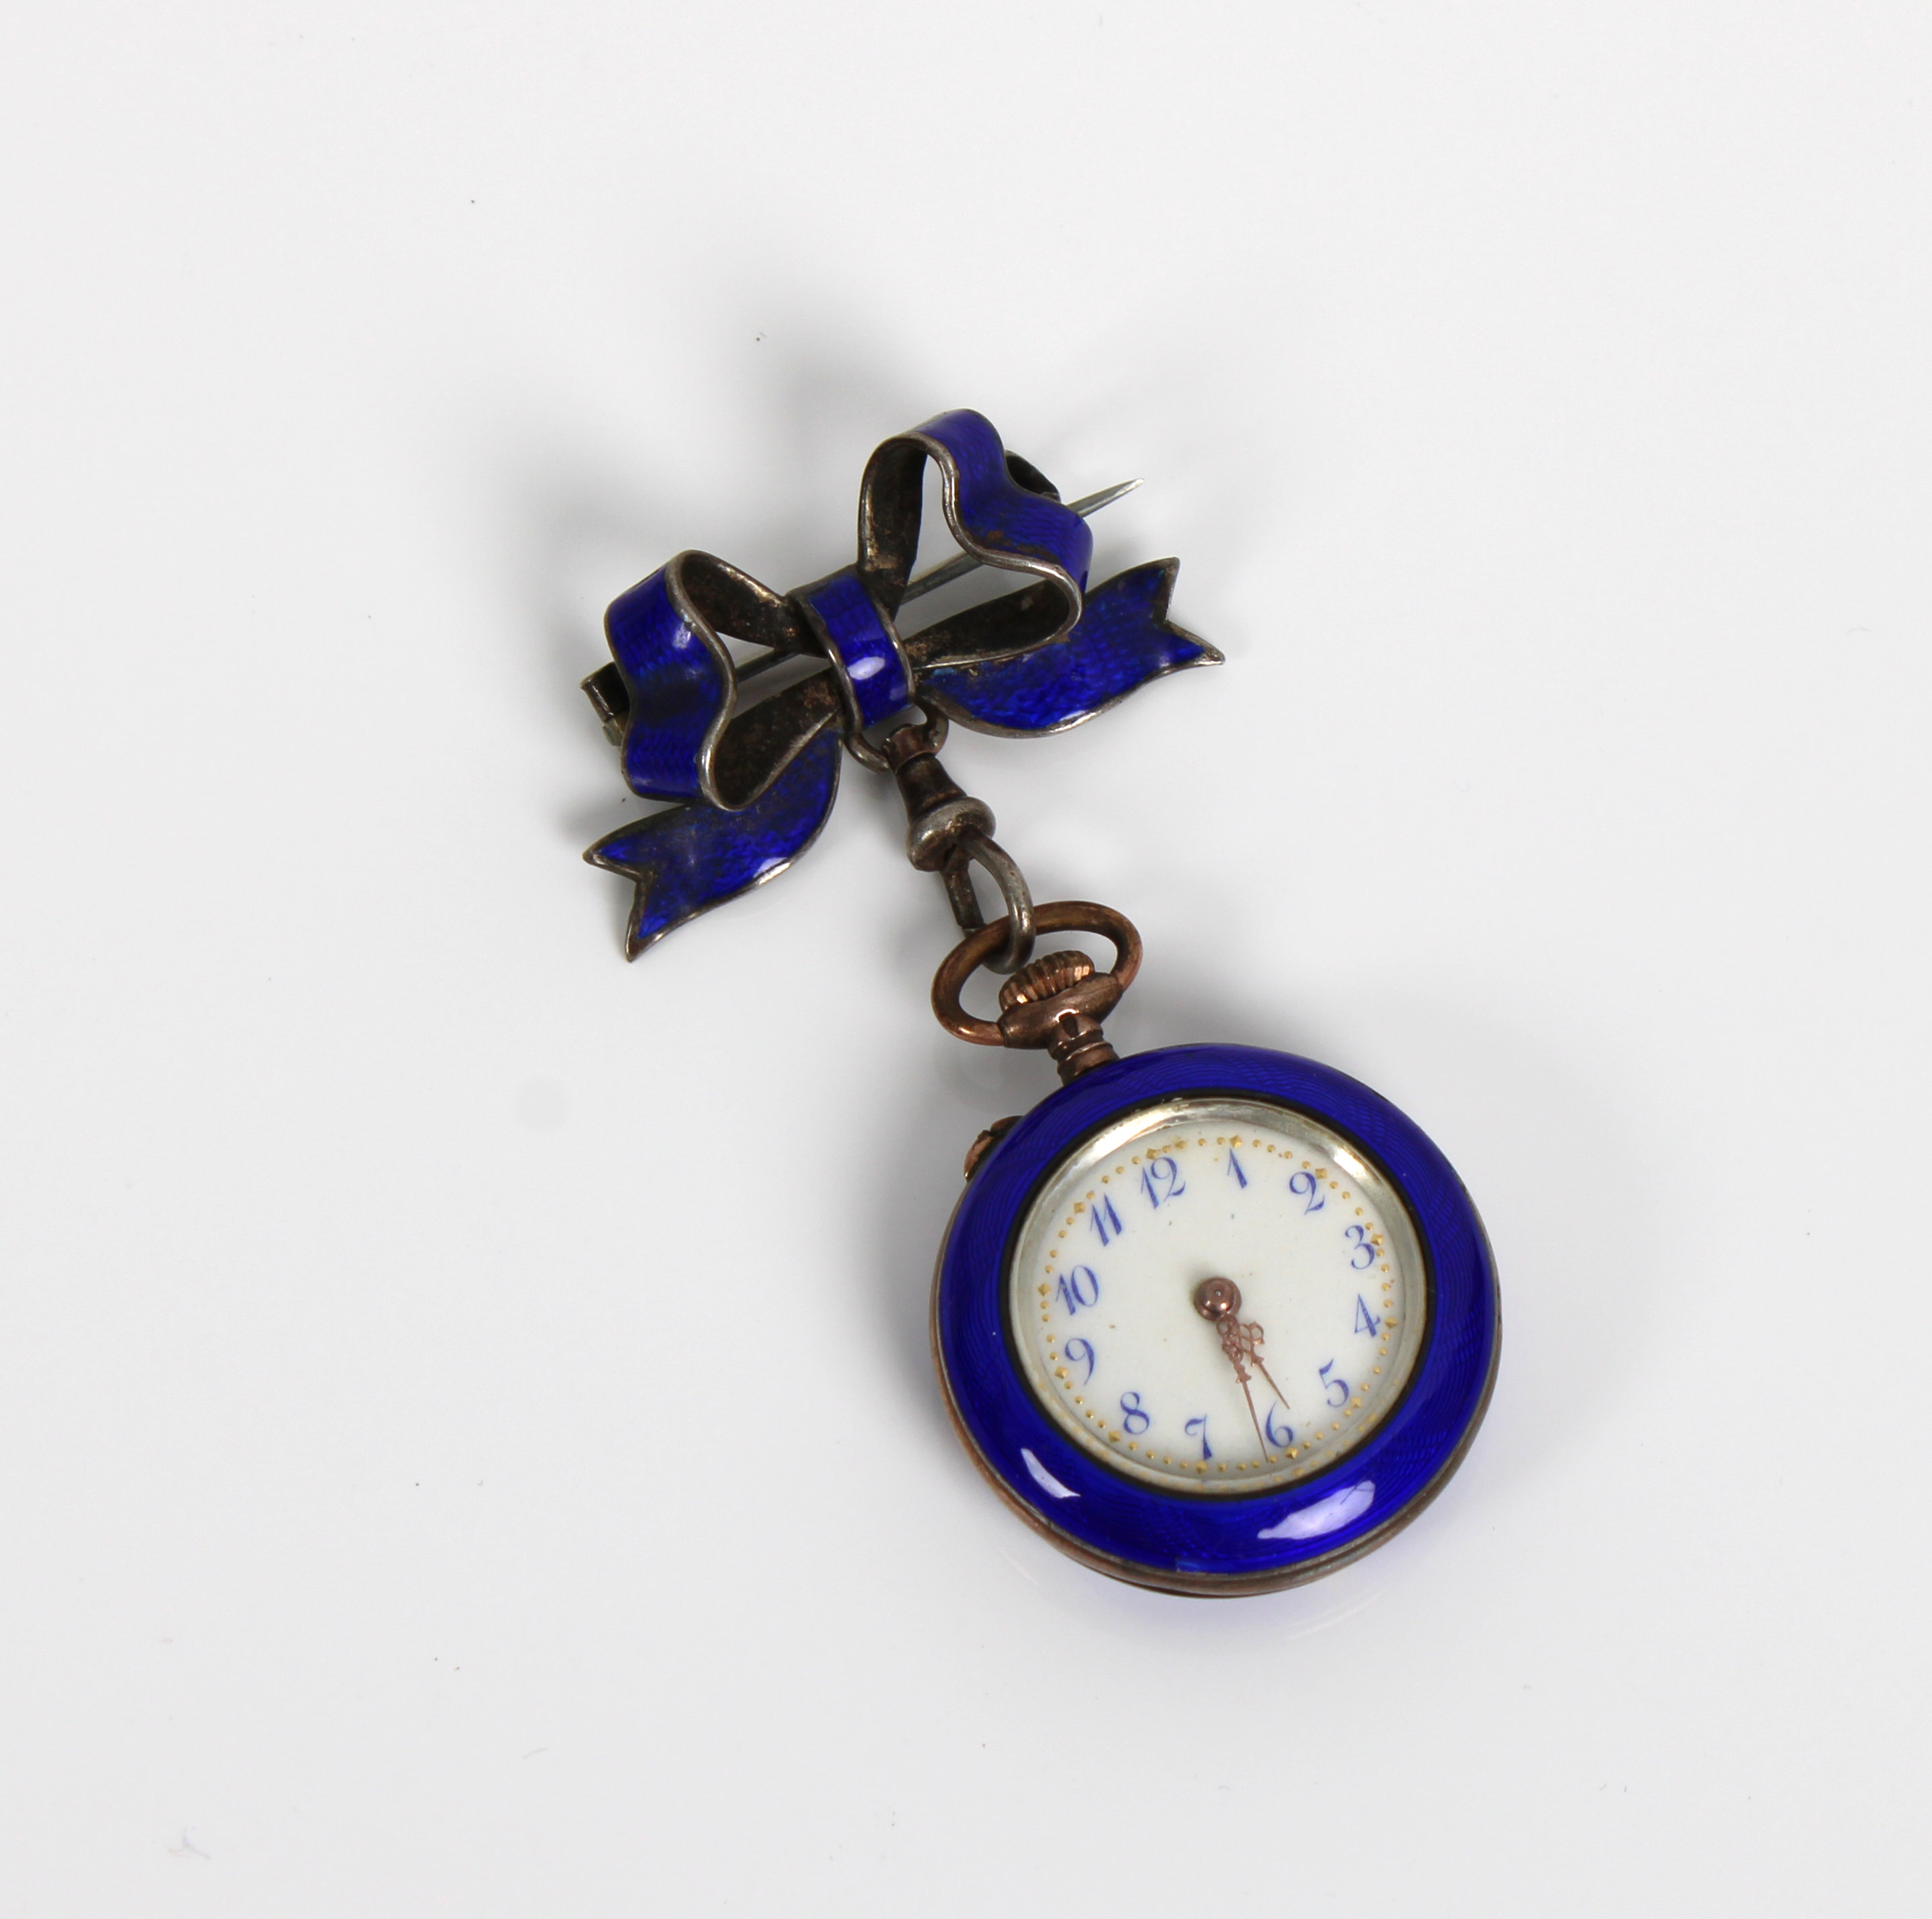 A French gold and blue enamel ladies fob watch of small proportions